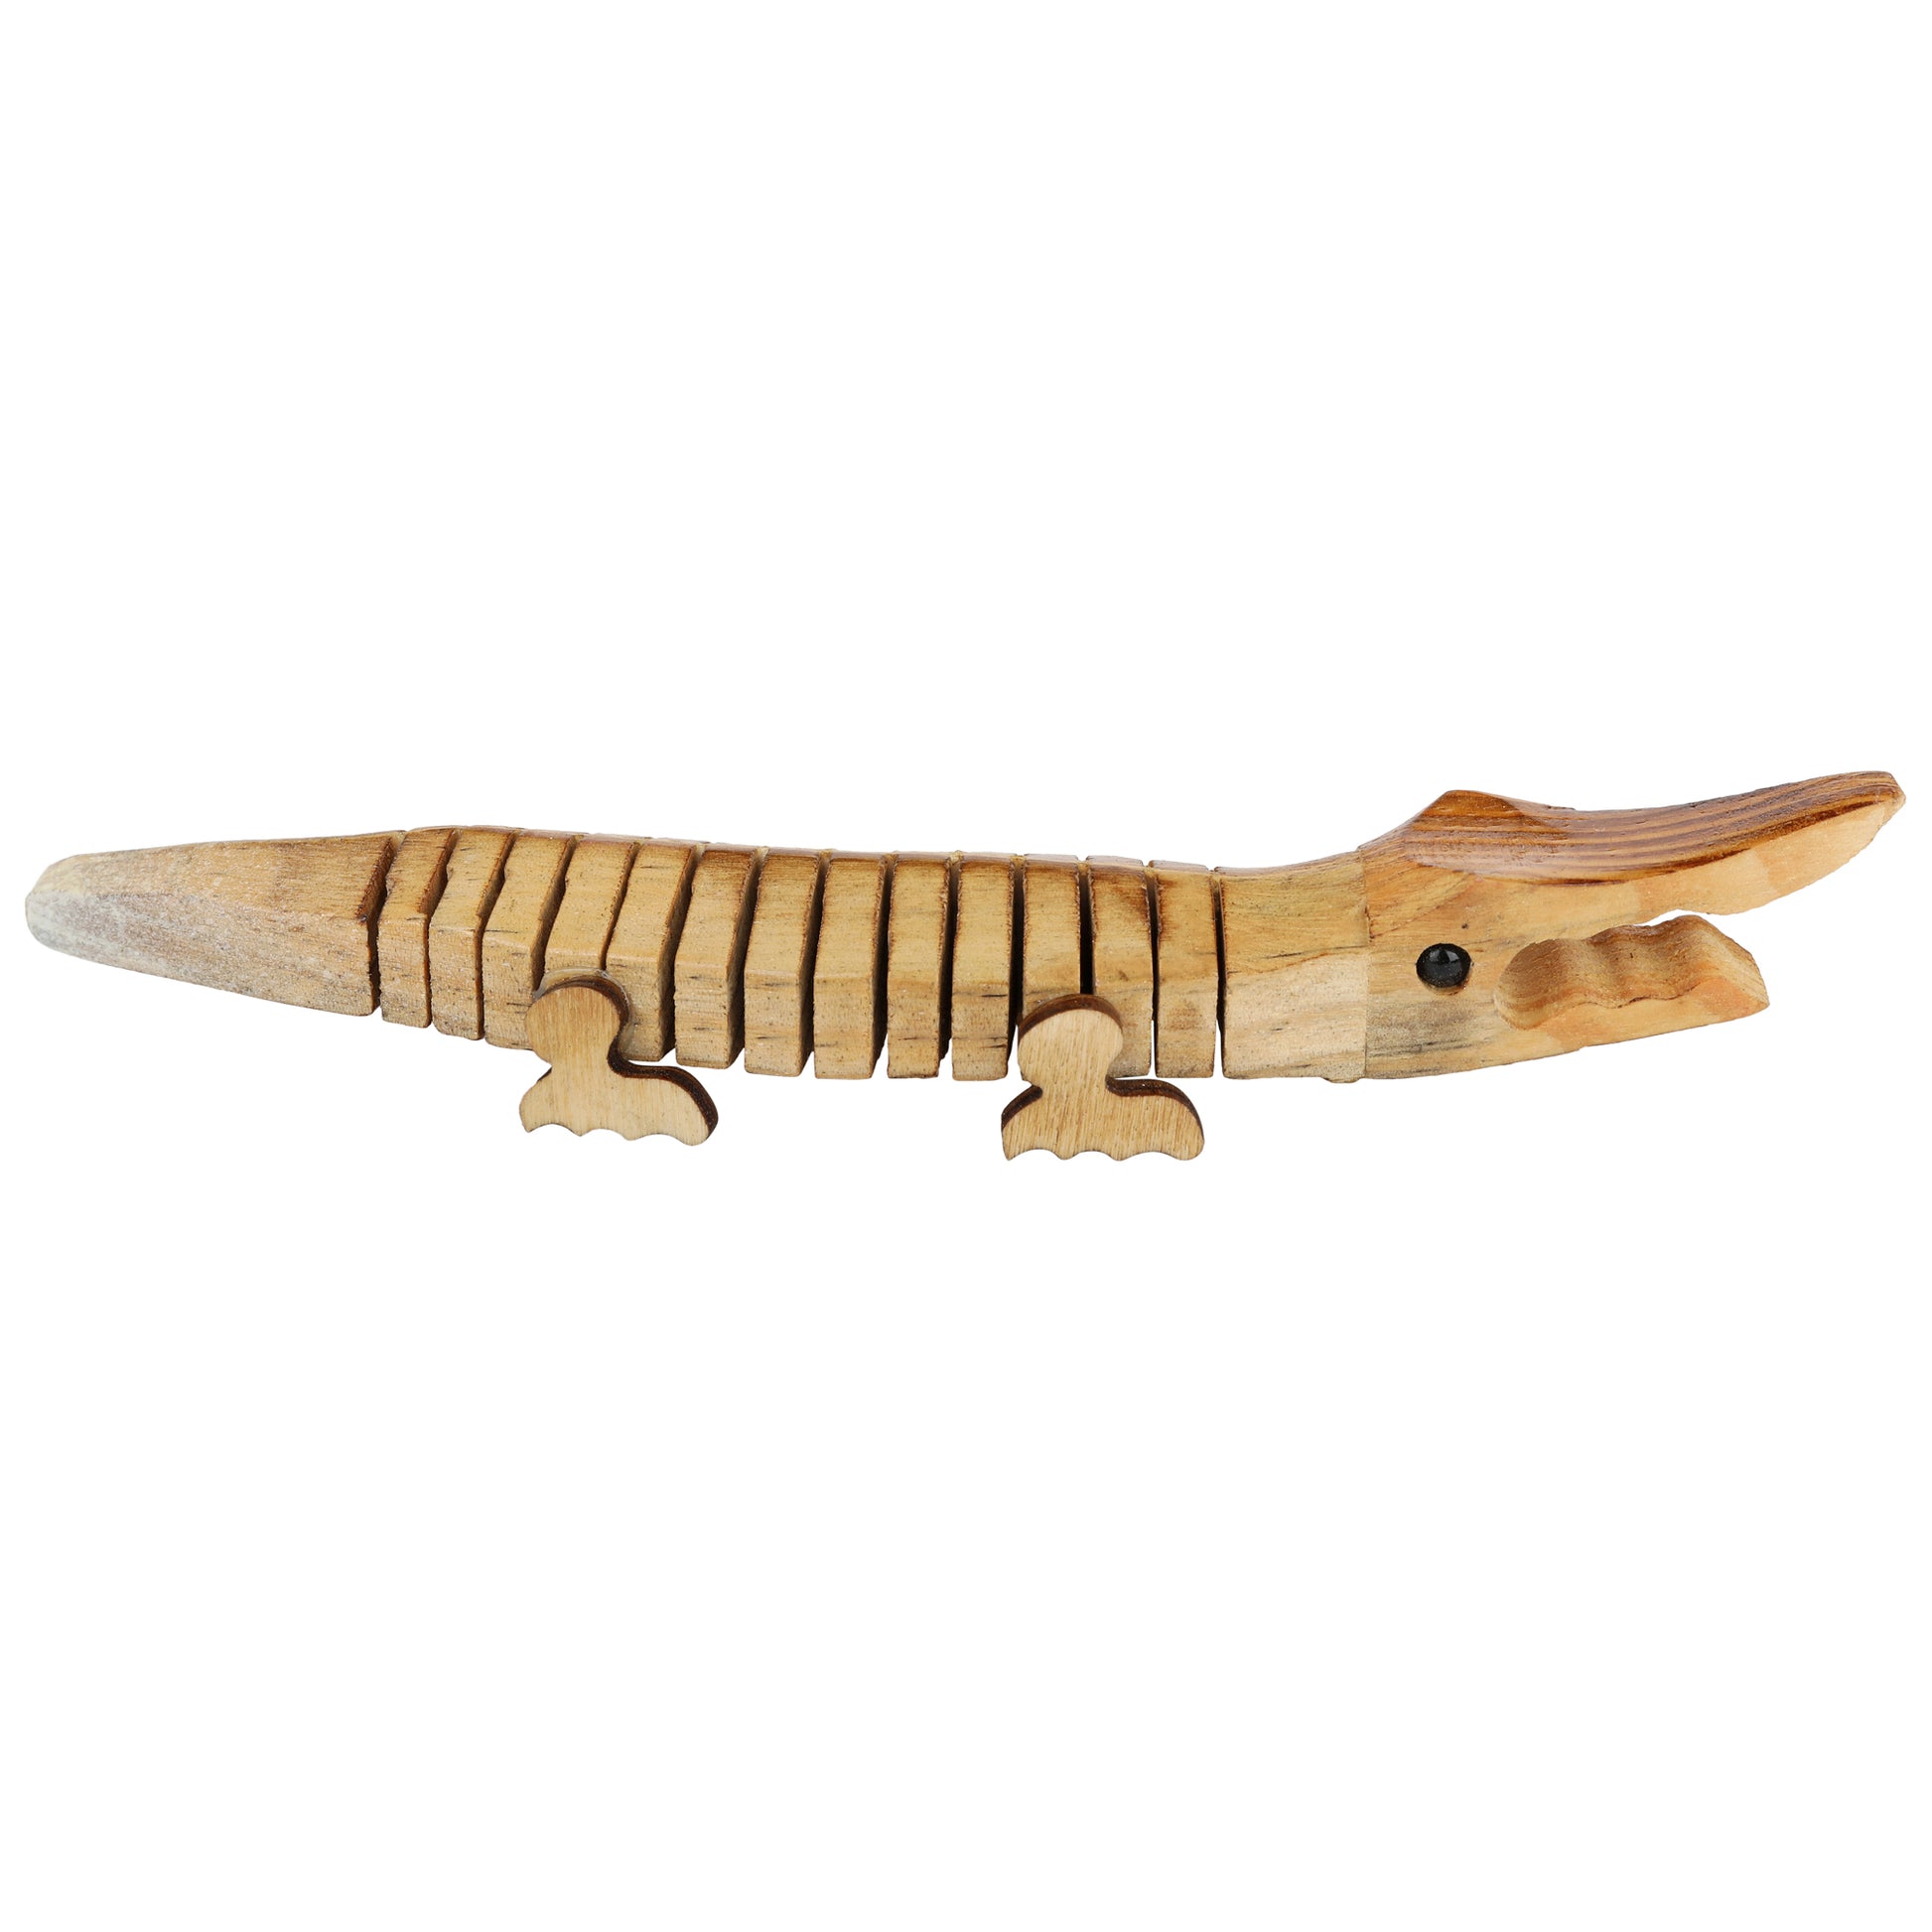 Close up of "Jaws" Wooden Alligator used for office décor